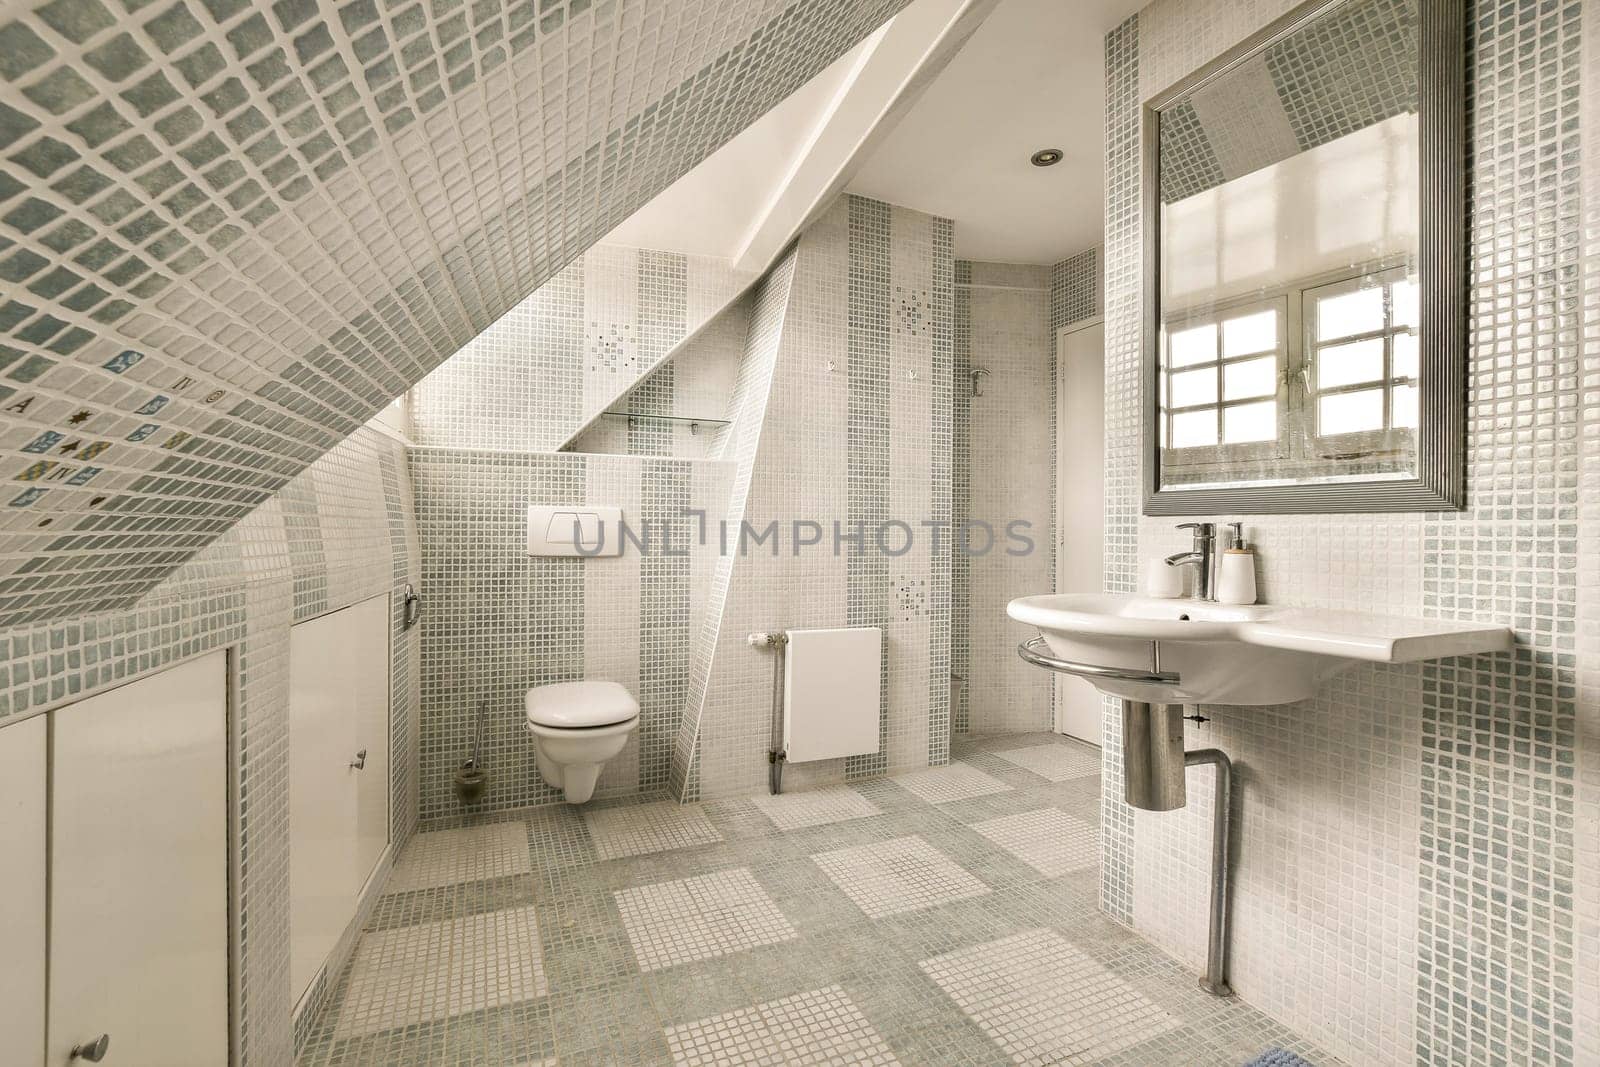 a bathroom with blue and white mosaic tiles on the walls, along with a sink and toilet in the corner